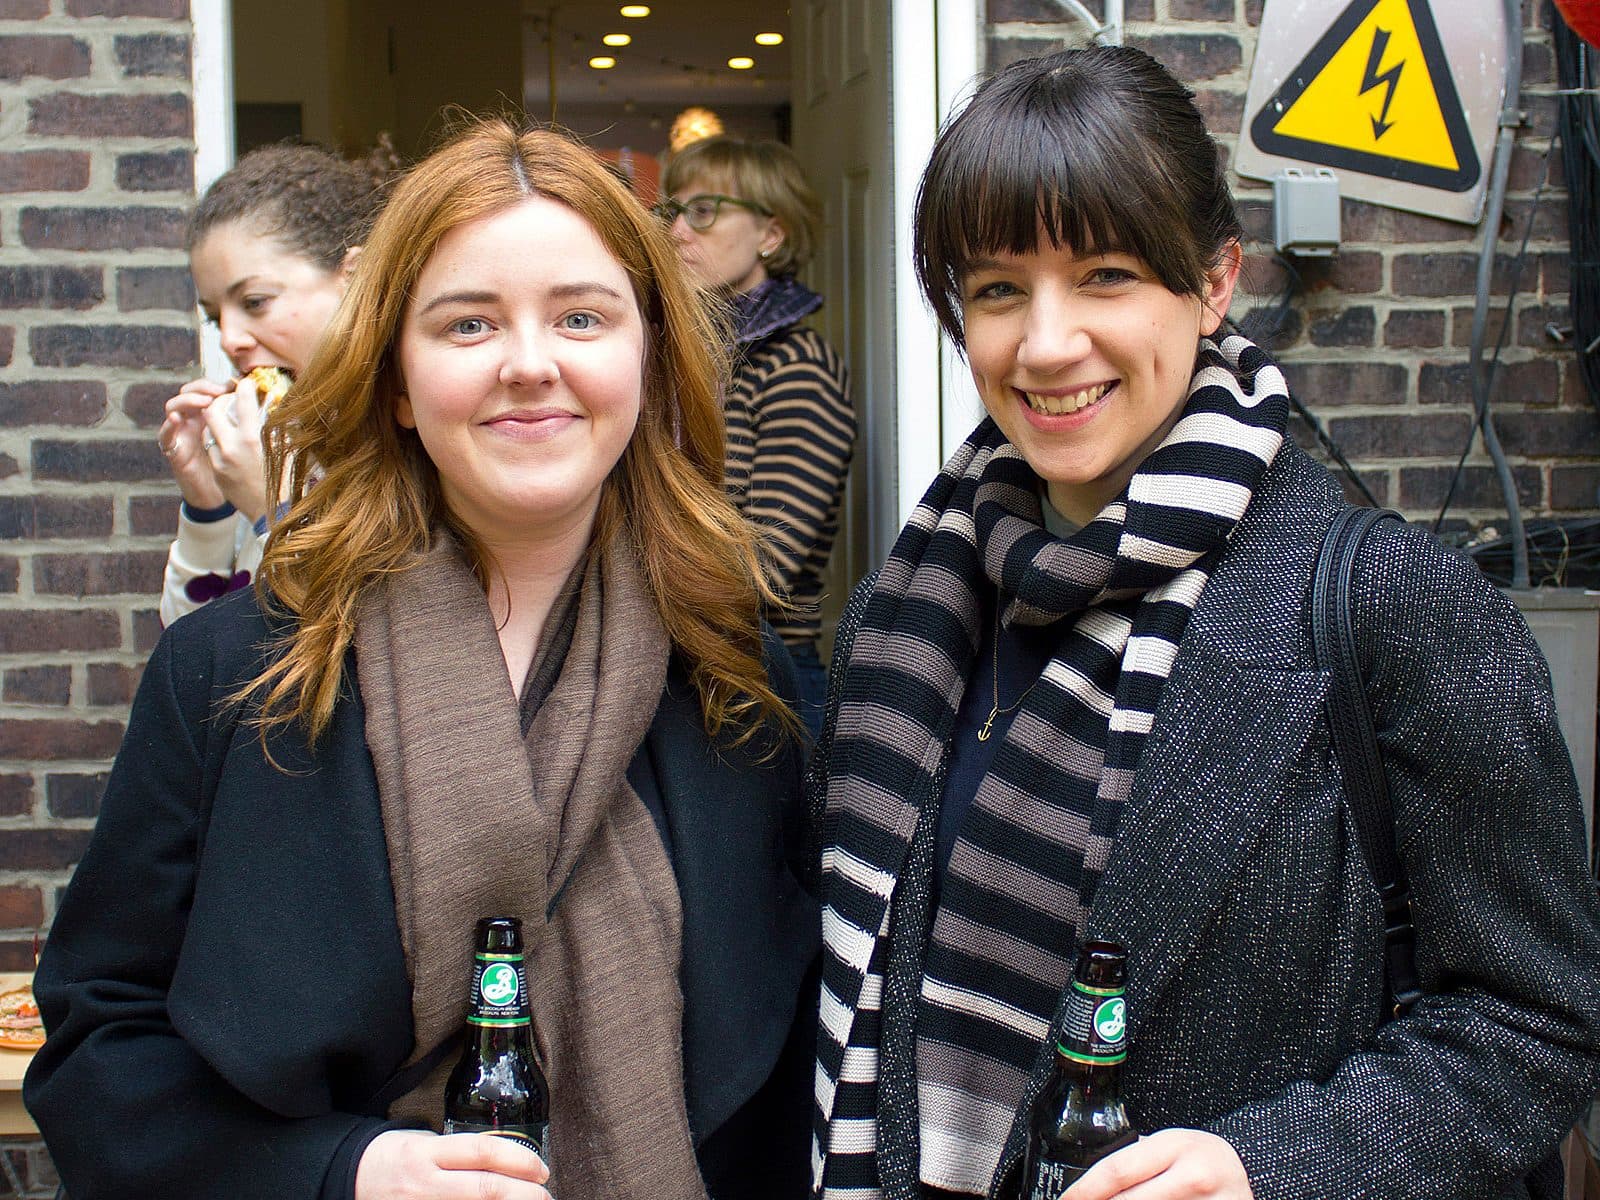 Two women, both holding bottles of beer, pose for a photo outdoors against a brick wall with caution stickers. One woman has long red hair, and the other has dark hair in a ponytail with bangs, both smiling. In the background, two people are partially visible, one eating pizza.